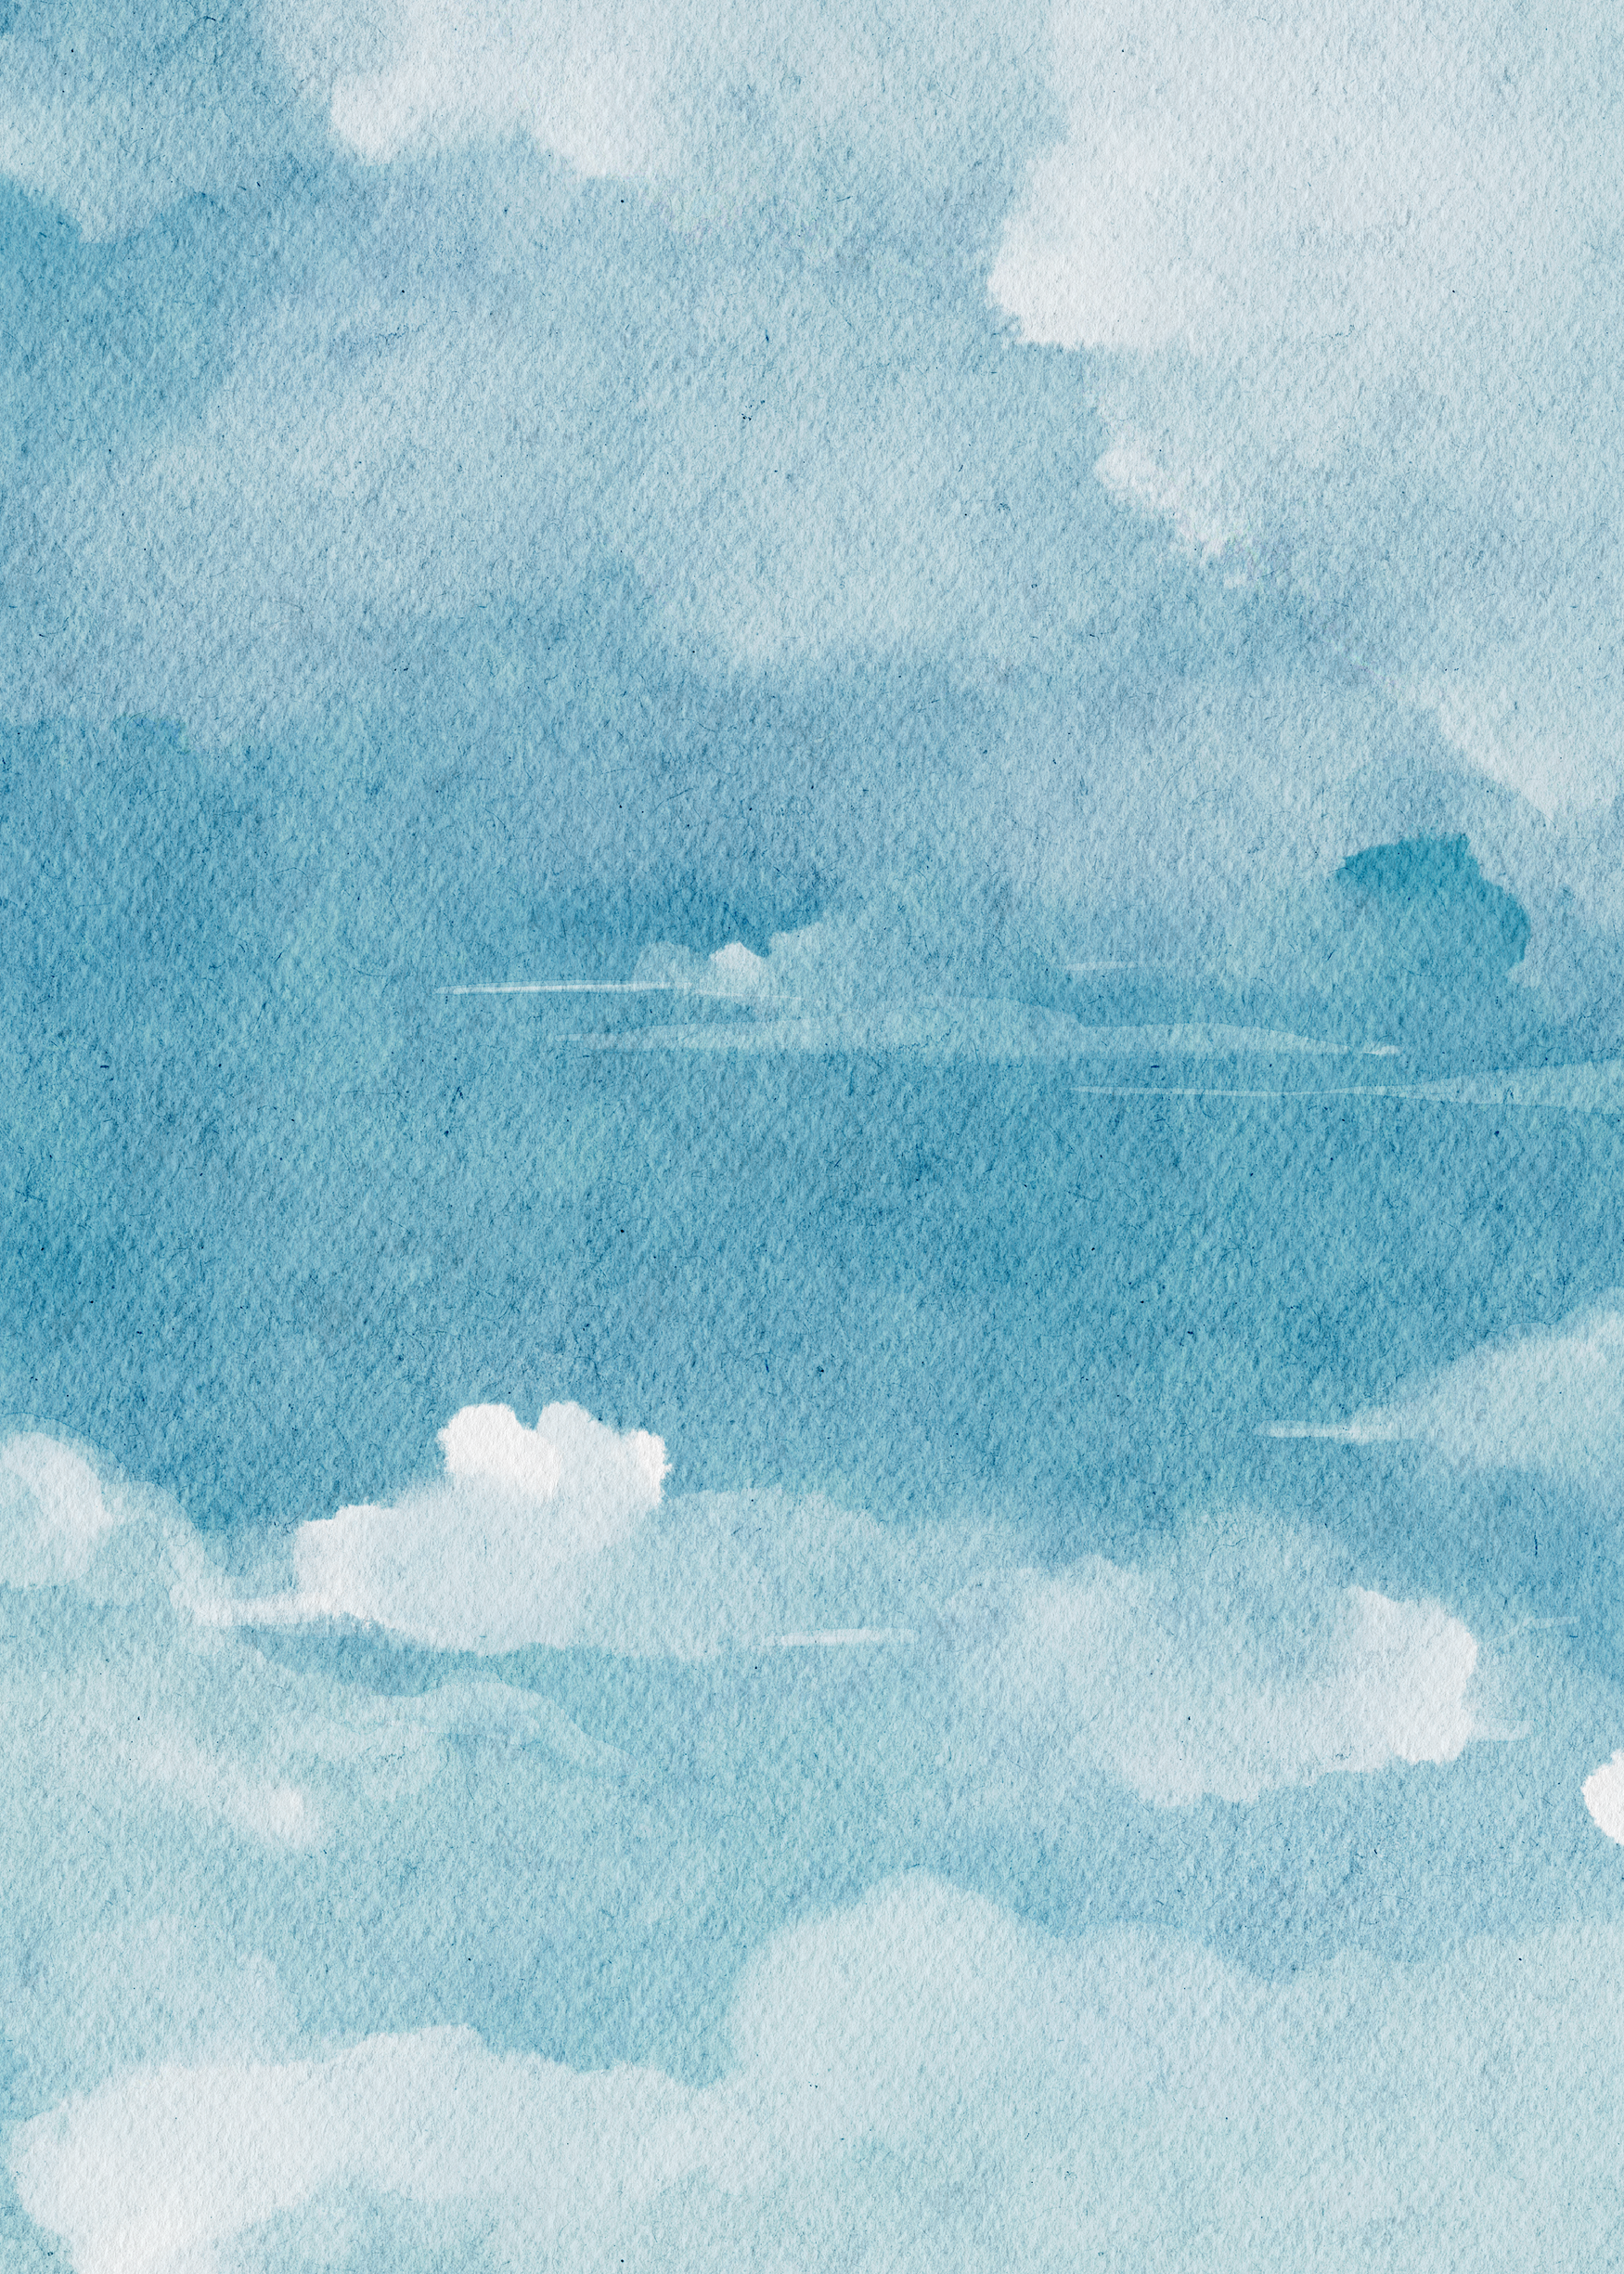 Sky background watercolor